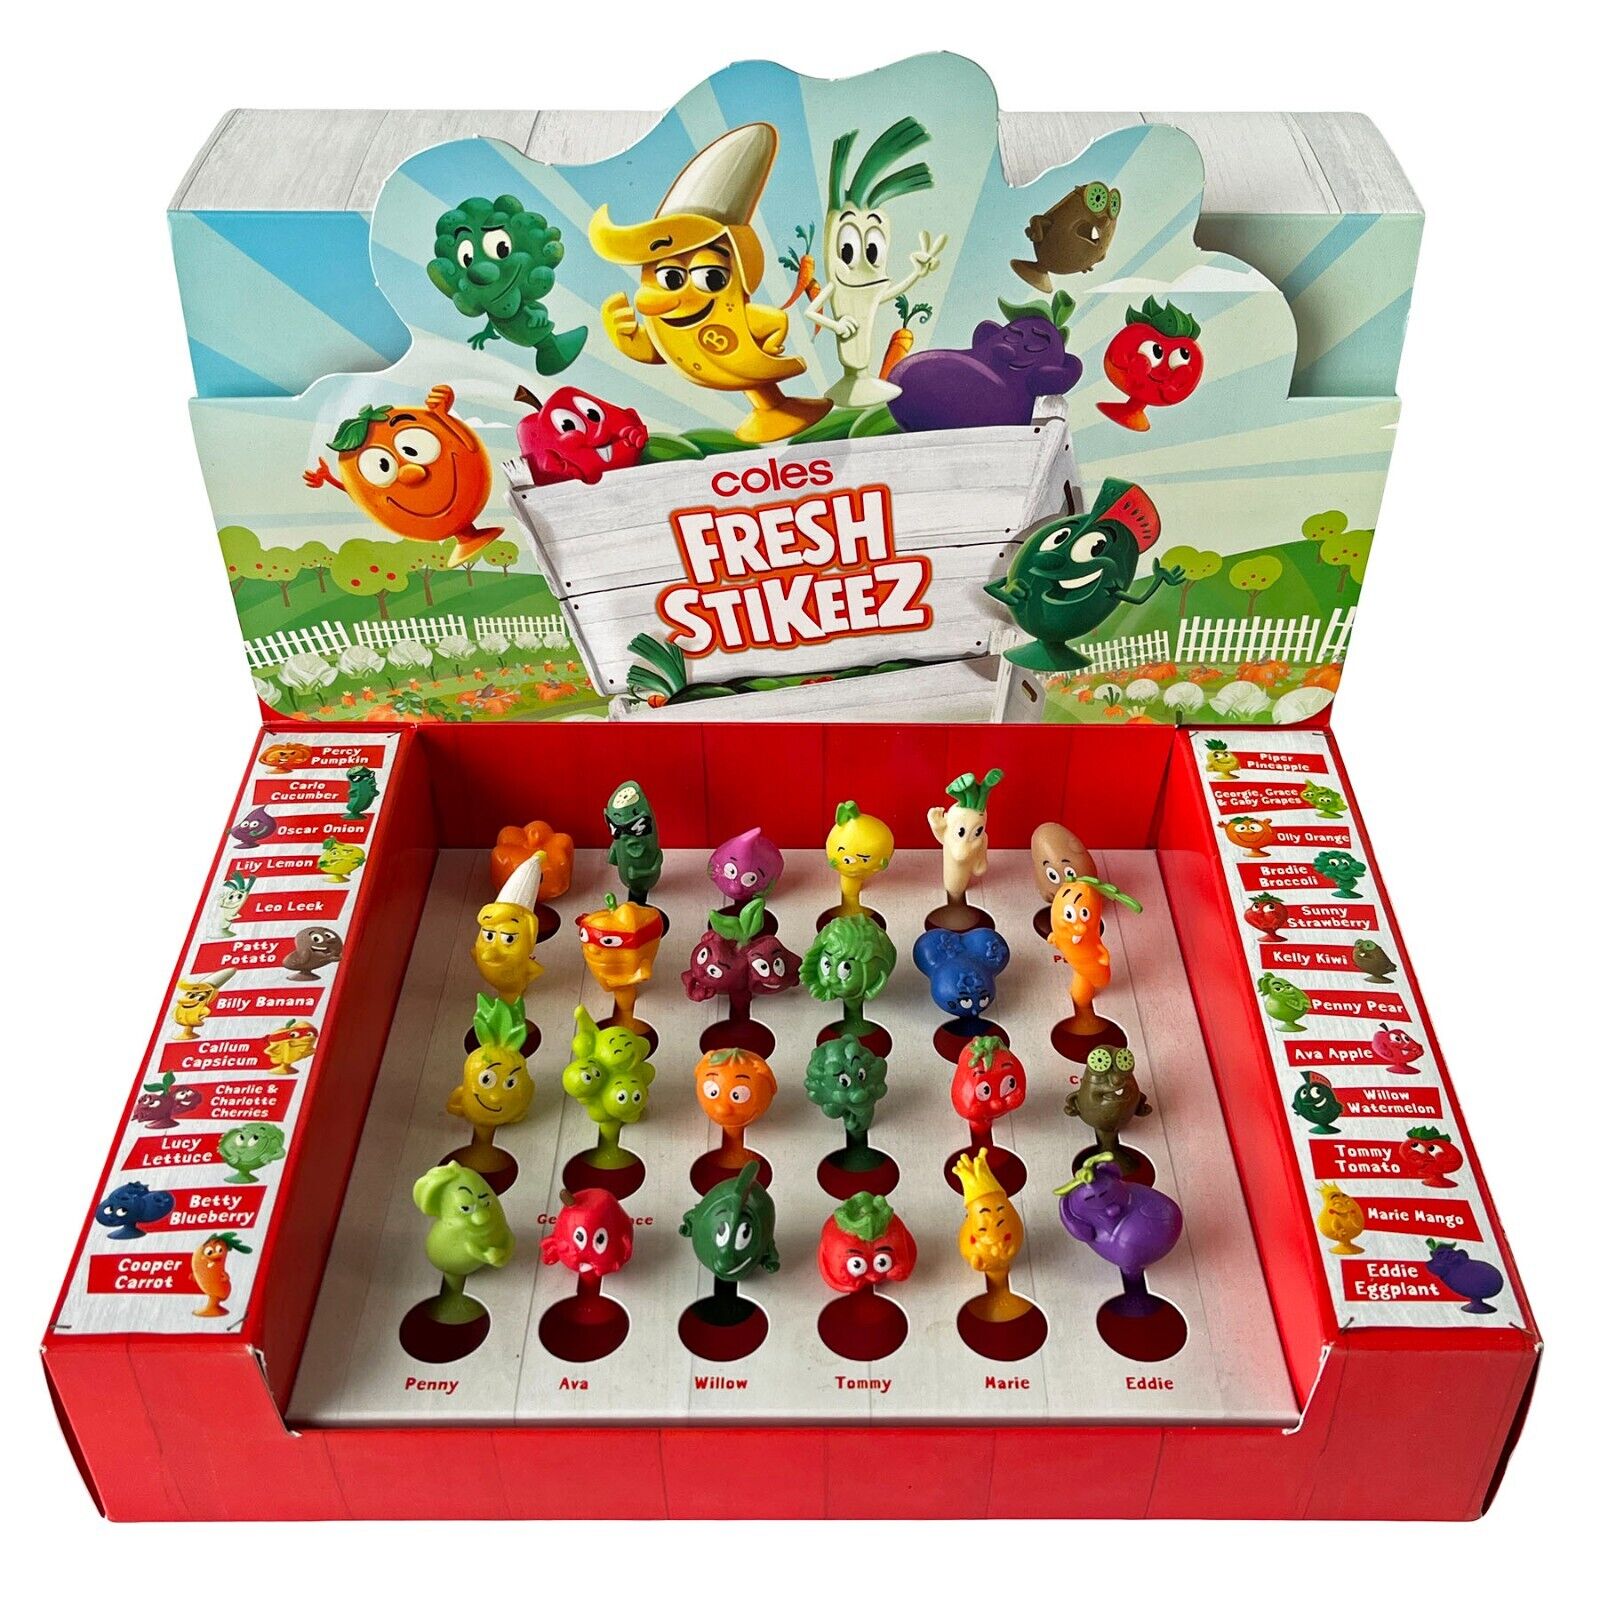 Full Series 1 Set of 24 Coles Fresh Stikeez in Collectors Case Complete